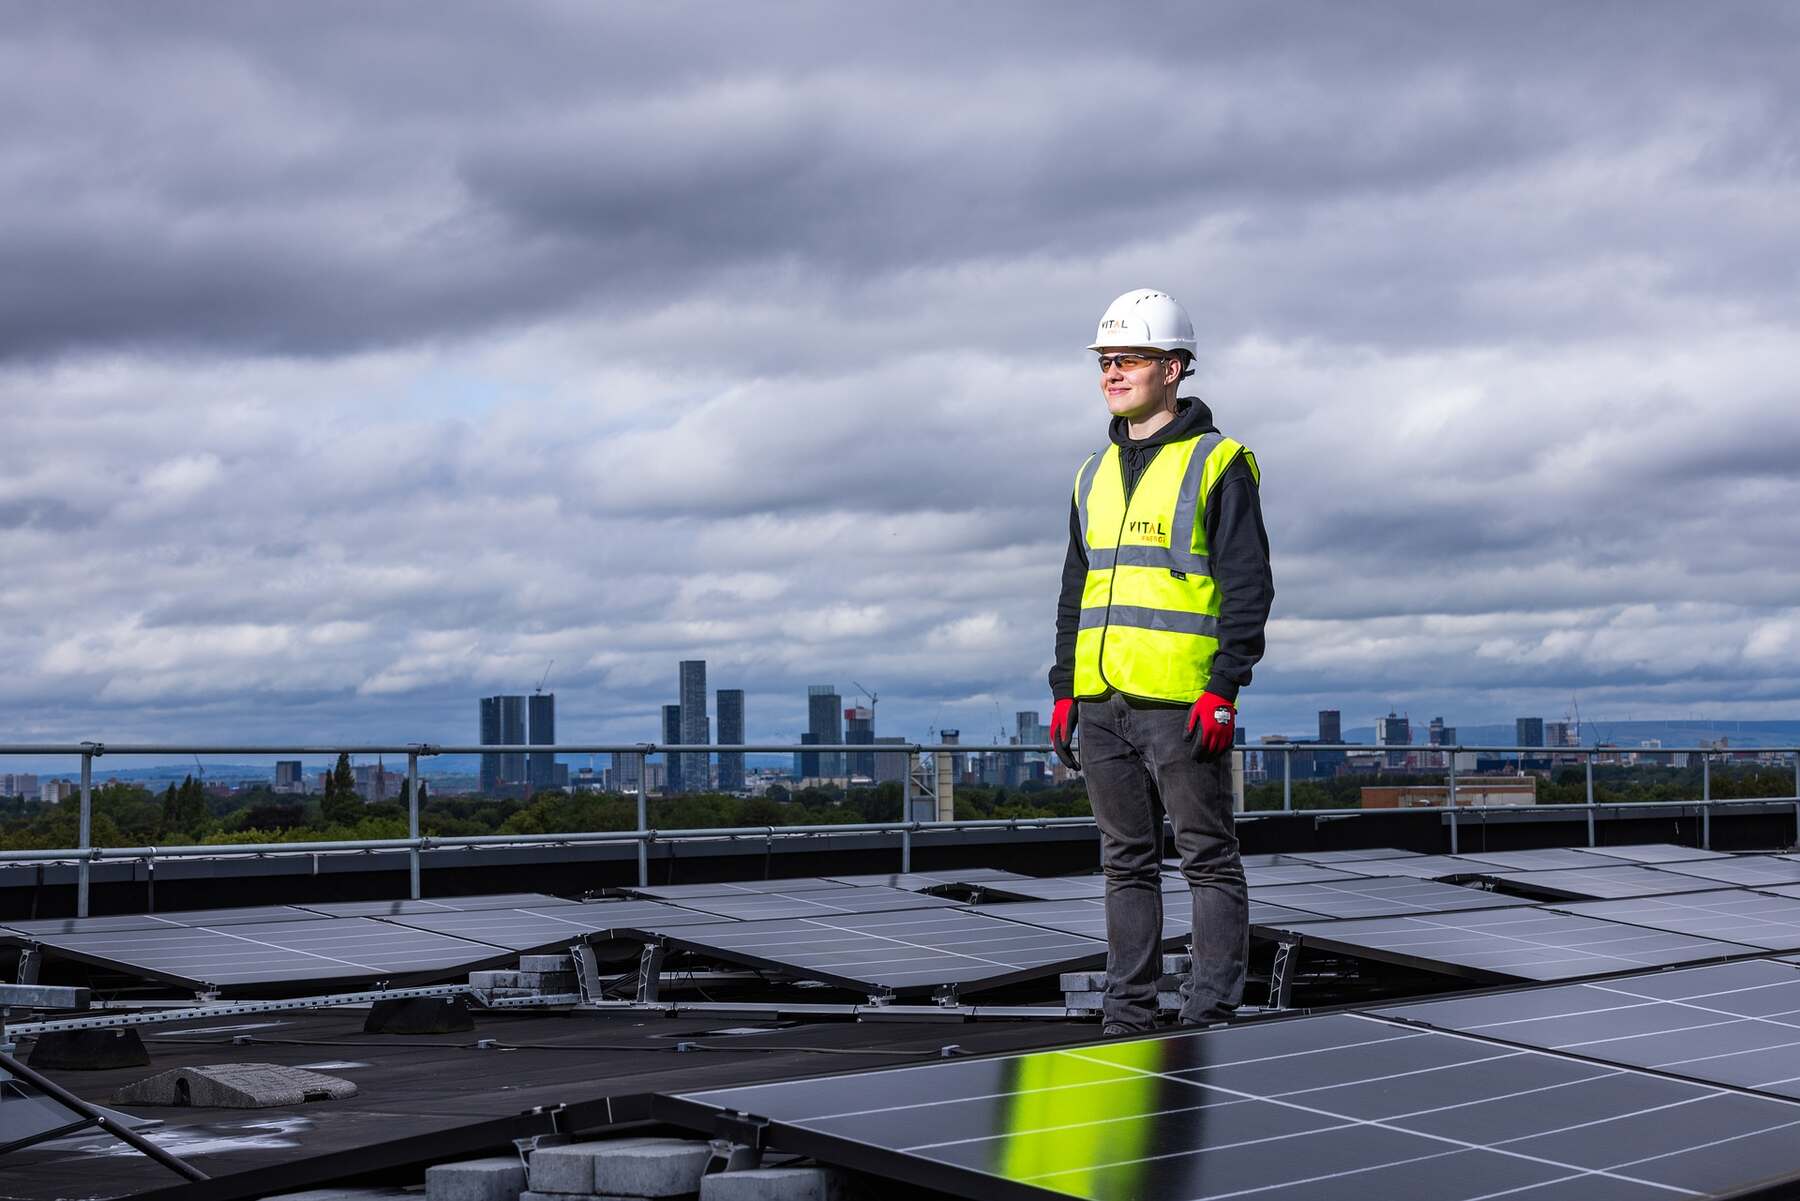 Man wearing protective gear standing on a roof filled with solar panels